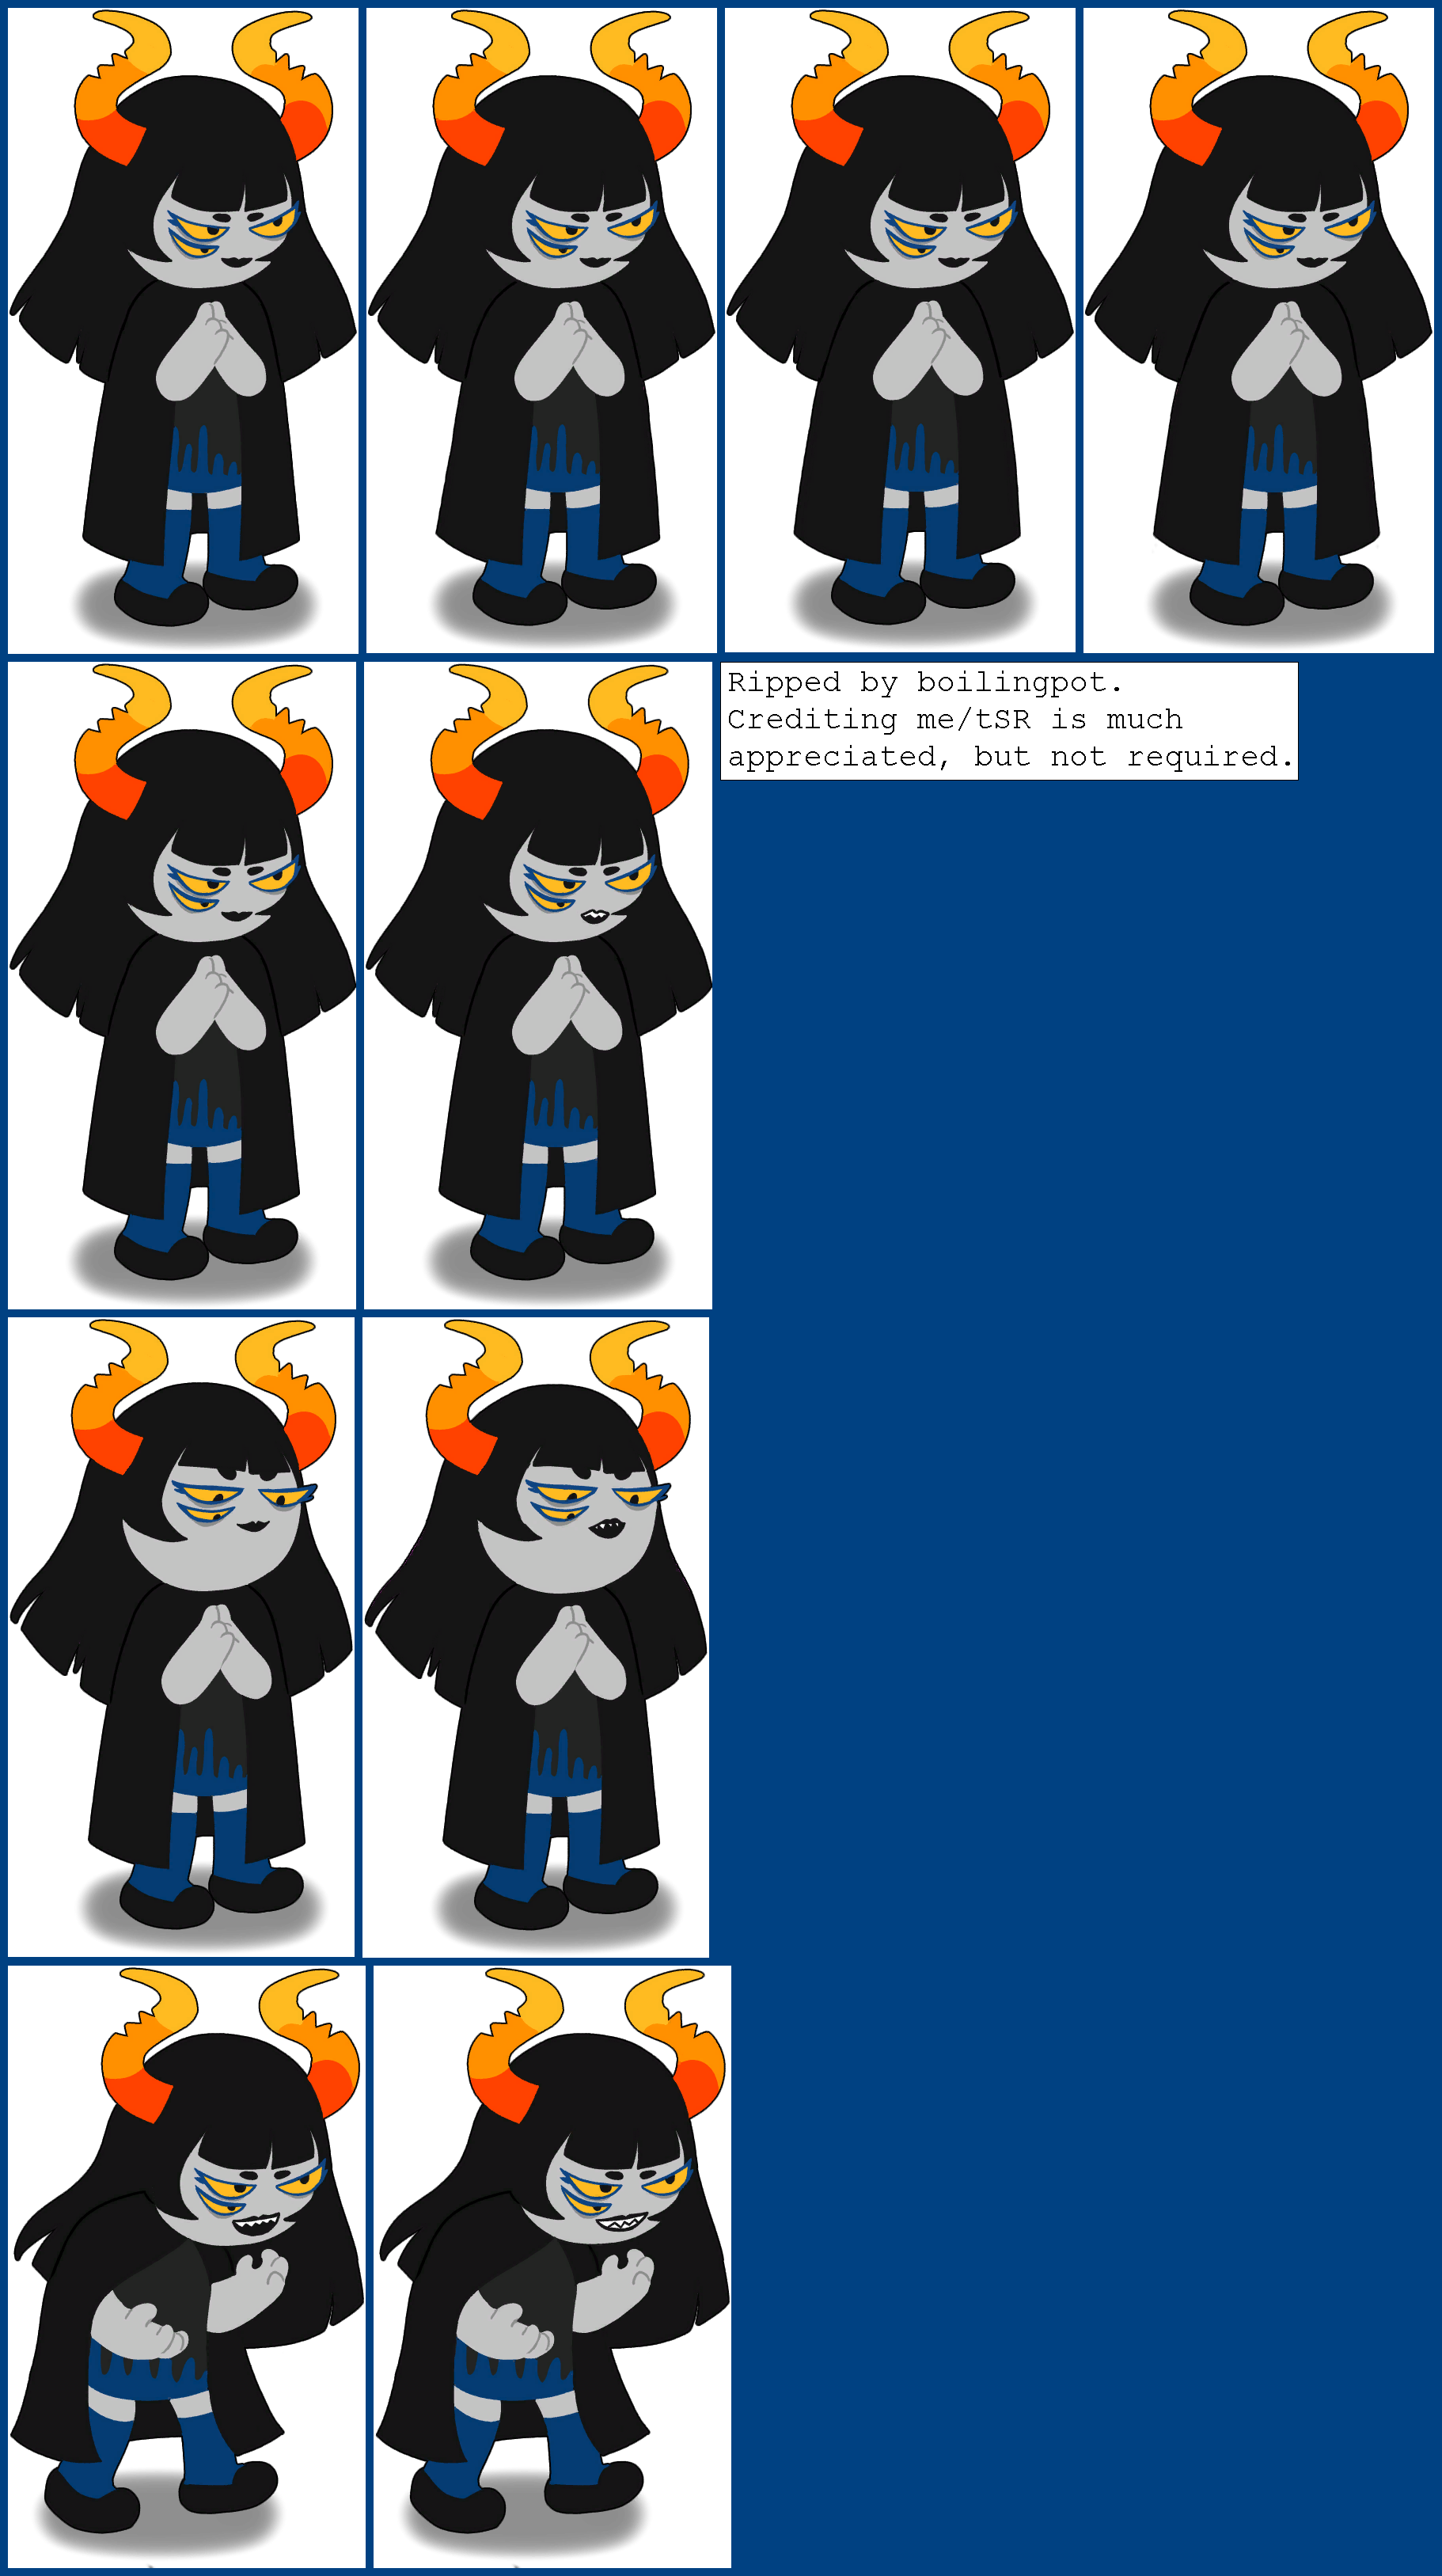 I AM NOT HOMESTUCK FAN. — Hight of Pizza Tower Characters